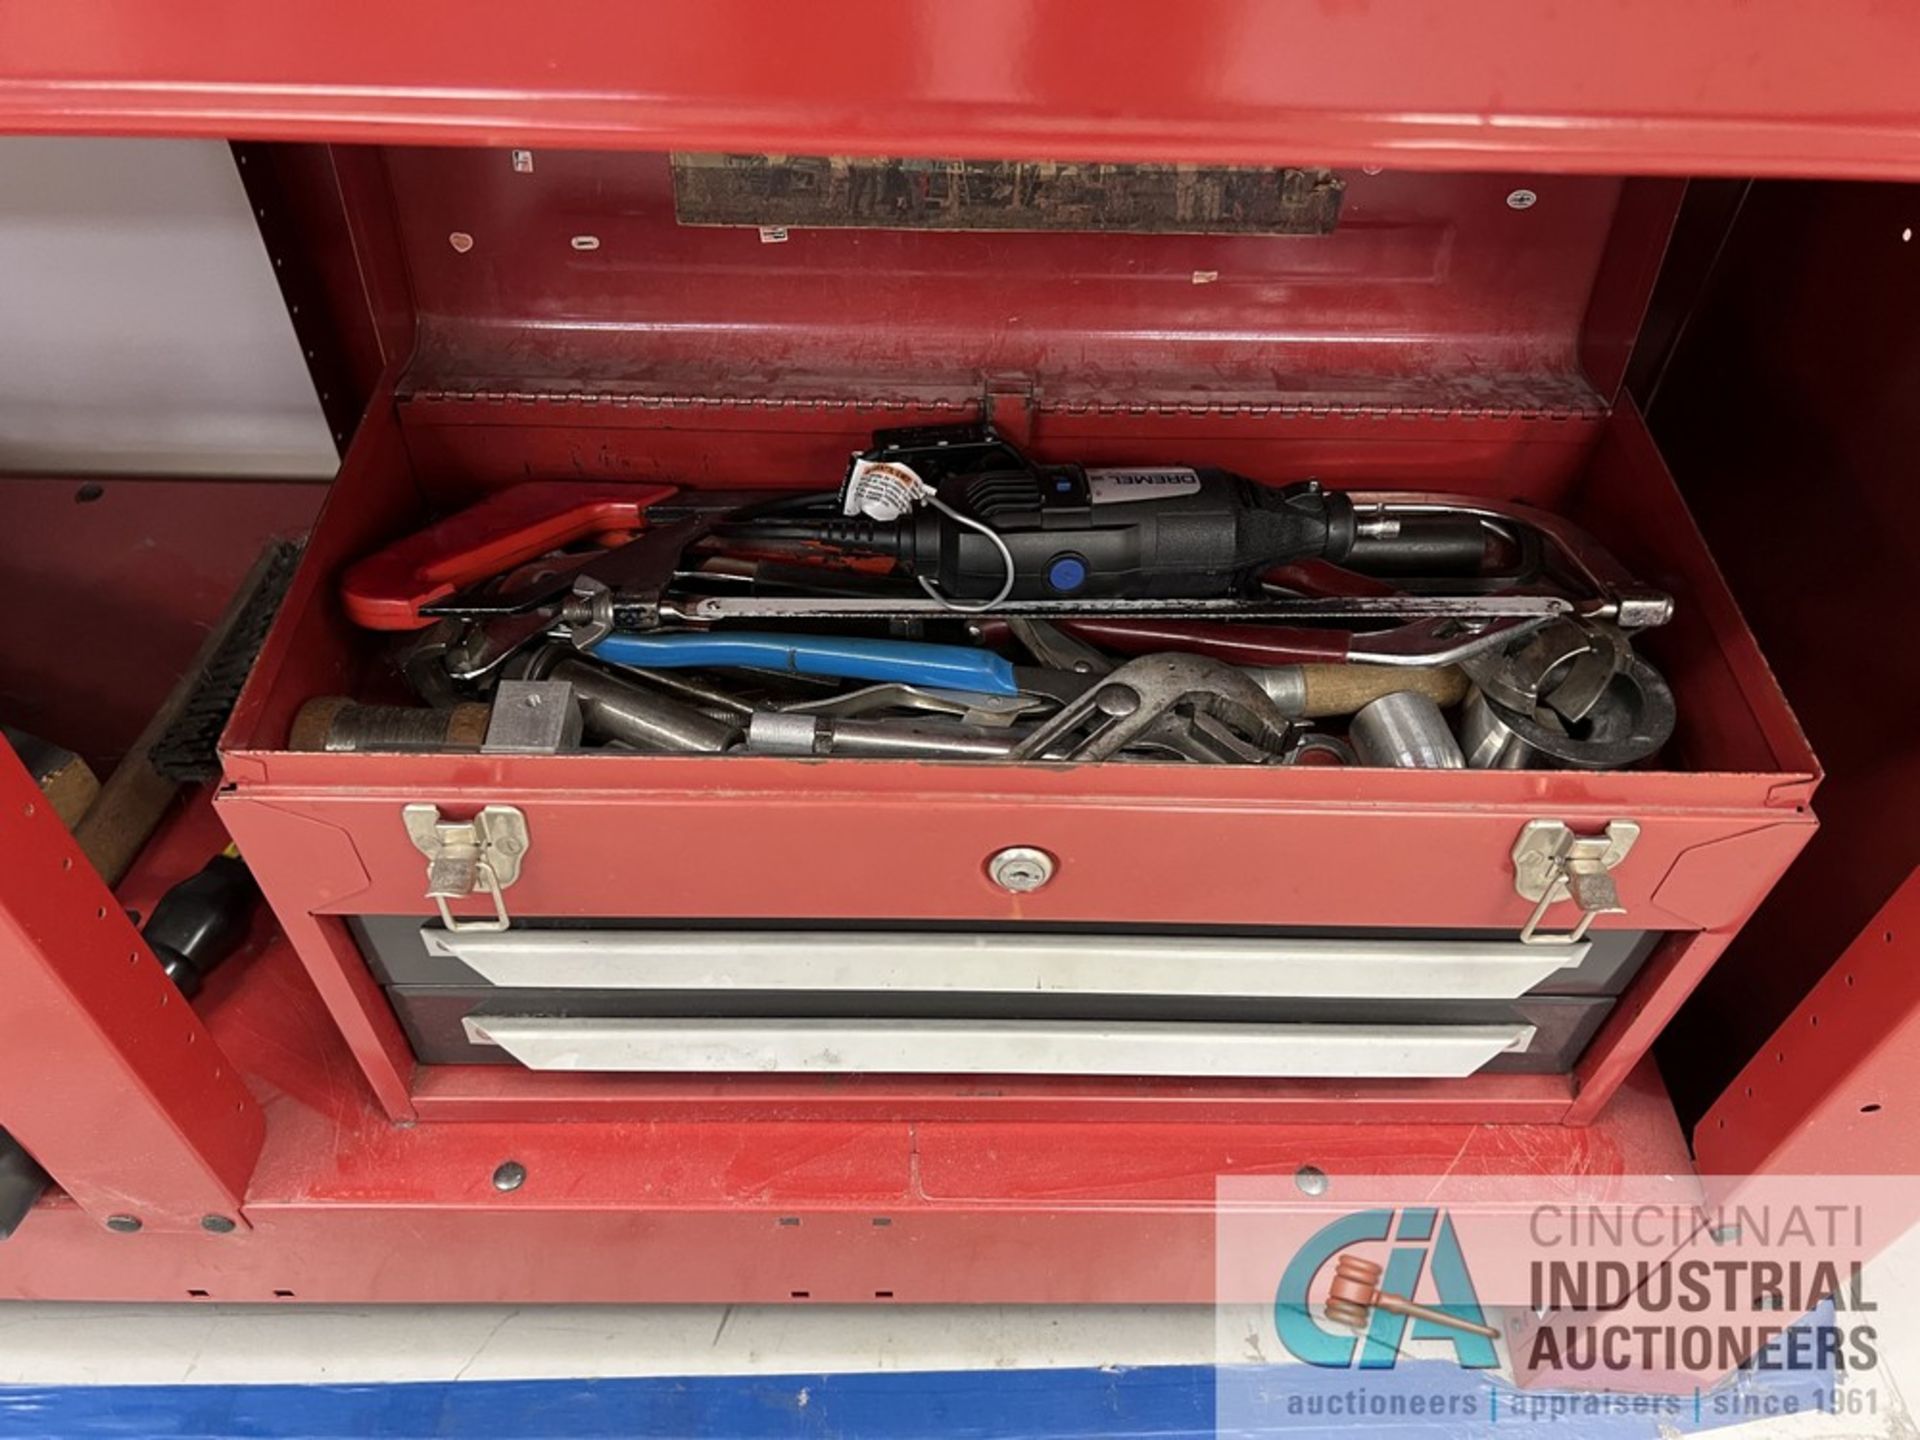 3-DRAWER WATERLOO TOOLBOX WITH TOOLS AND 4" VISE (INSP) - Image 2 of 4